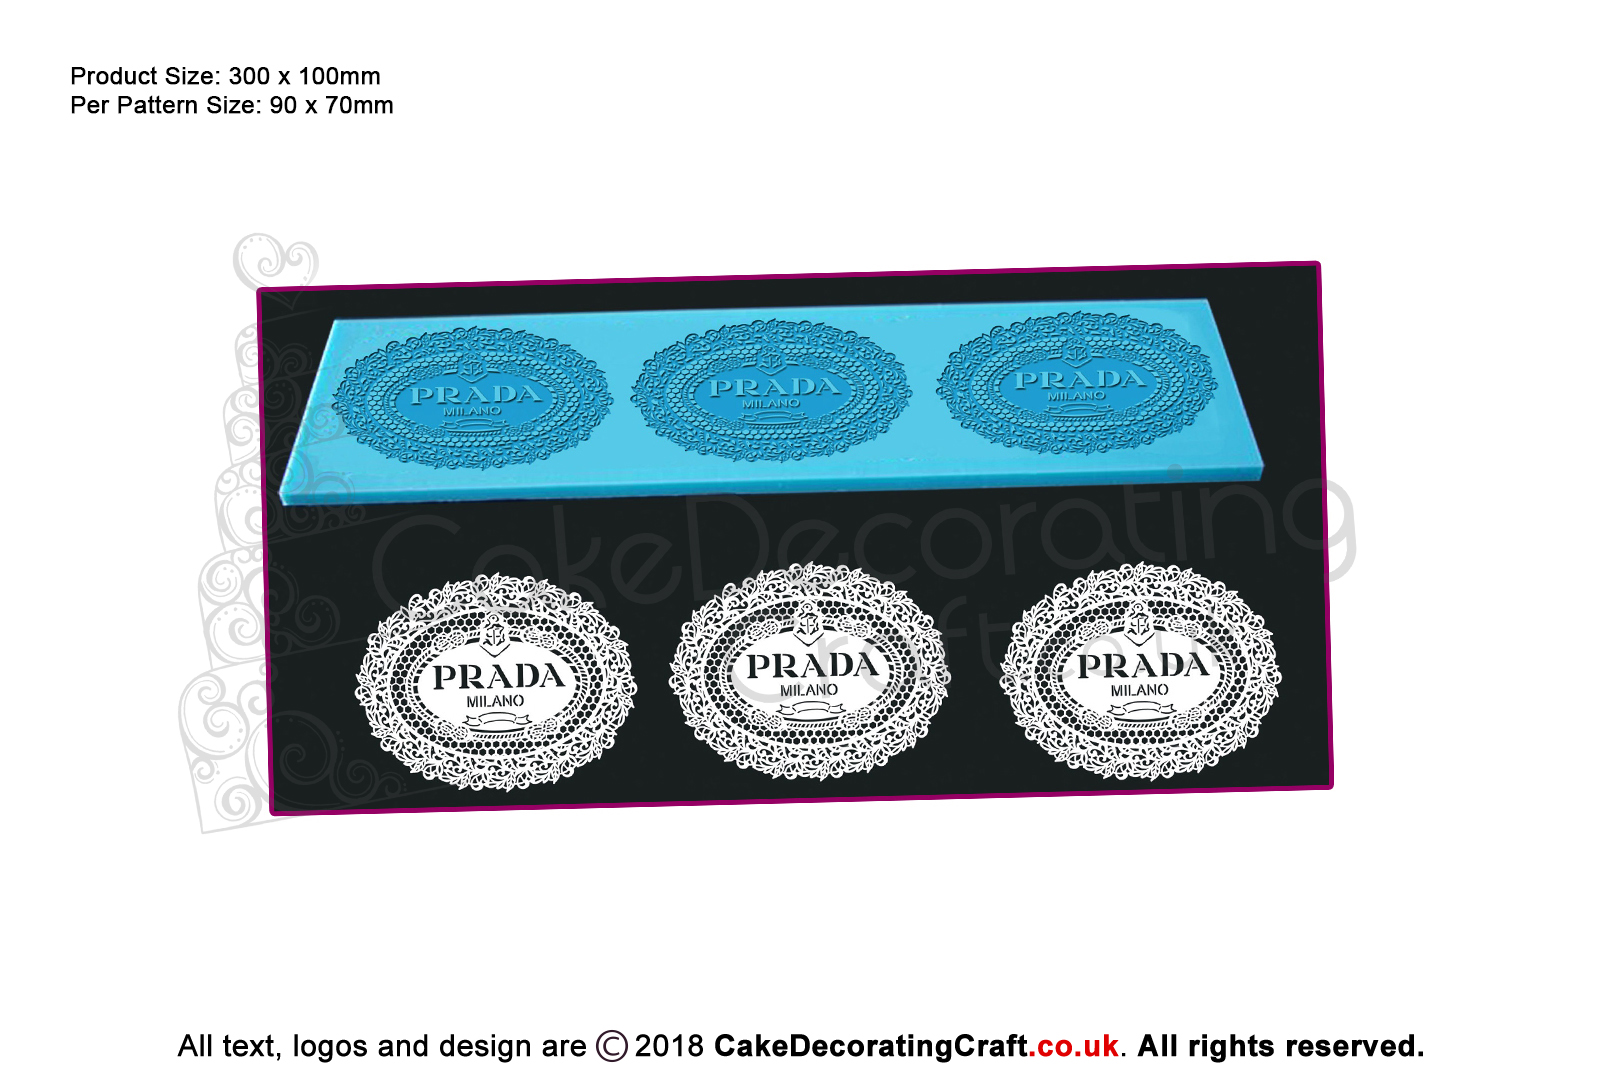 Prada | Cake Lace Mats for Edible Cake Lace Mixes and Premixes | Cake and Cupcake Decorating Craft Tool | Cake Makers Christmas Gifts Ideas